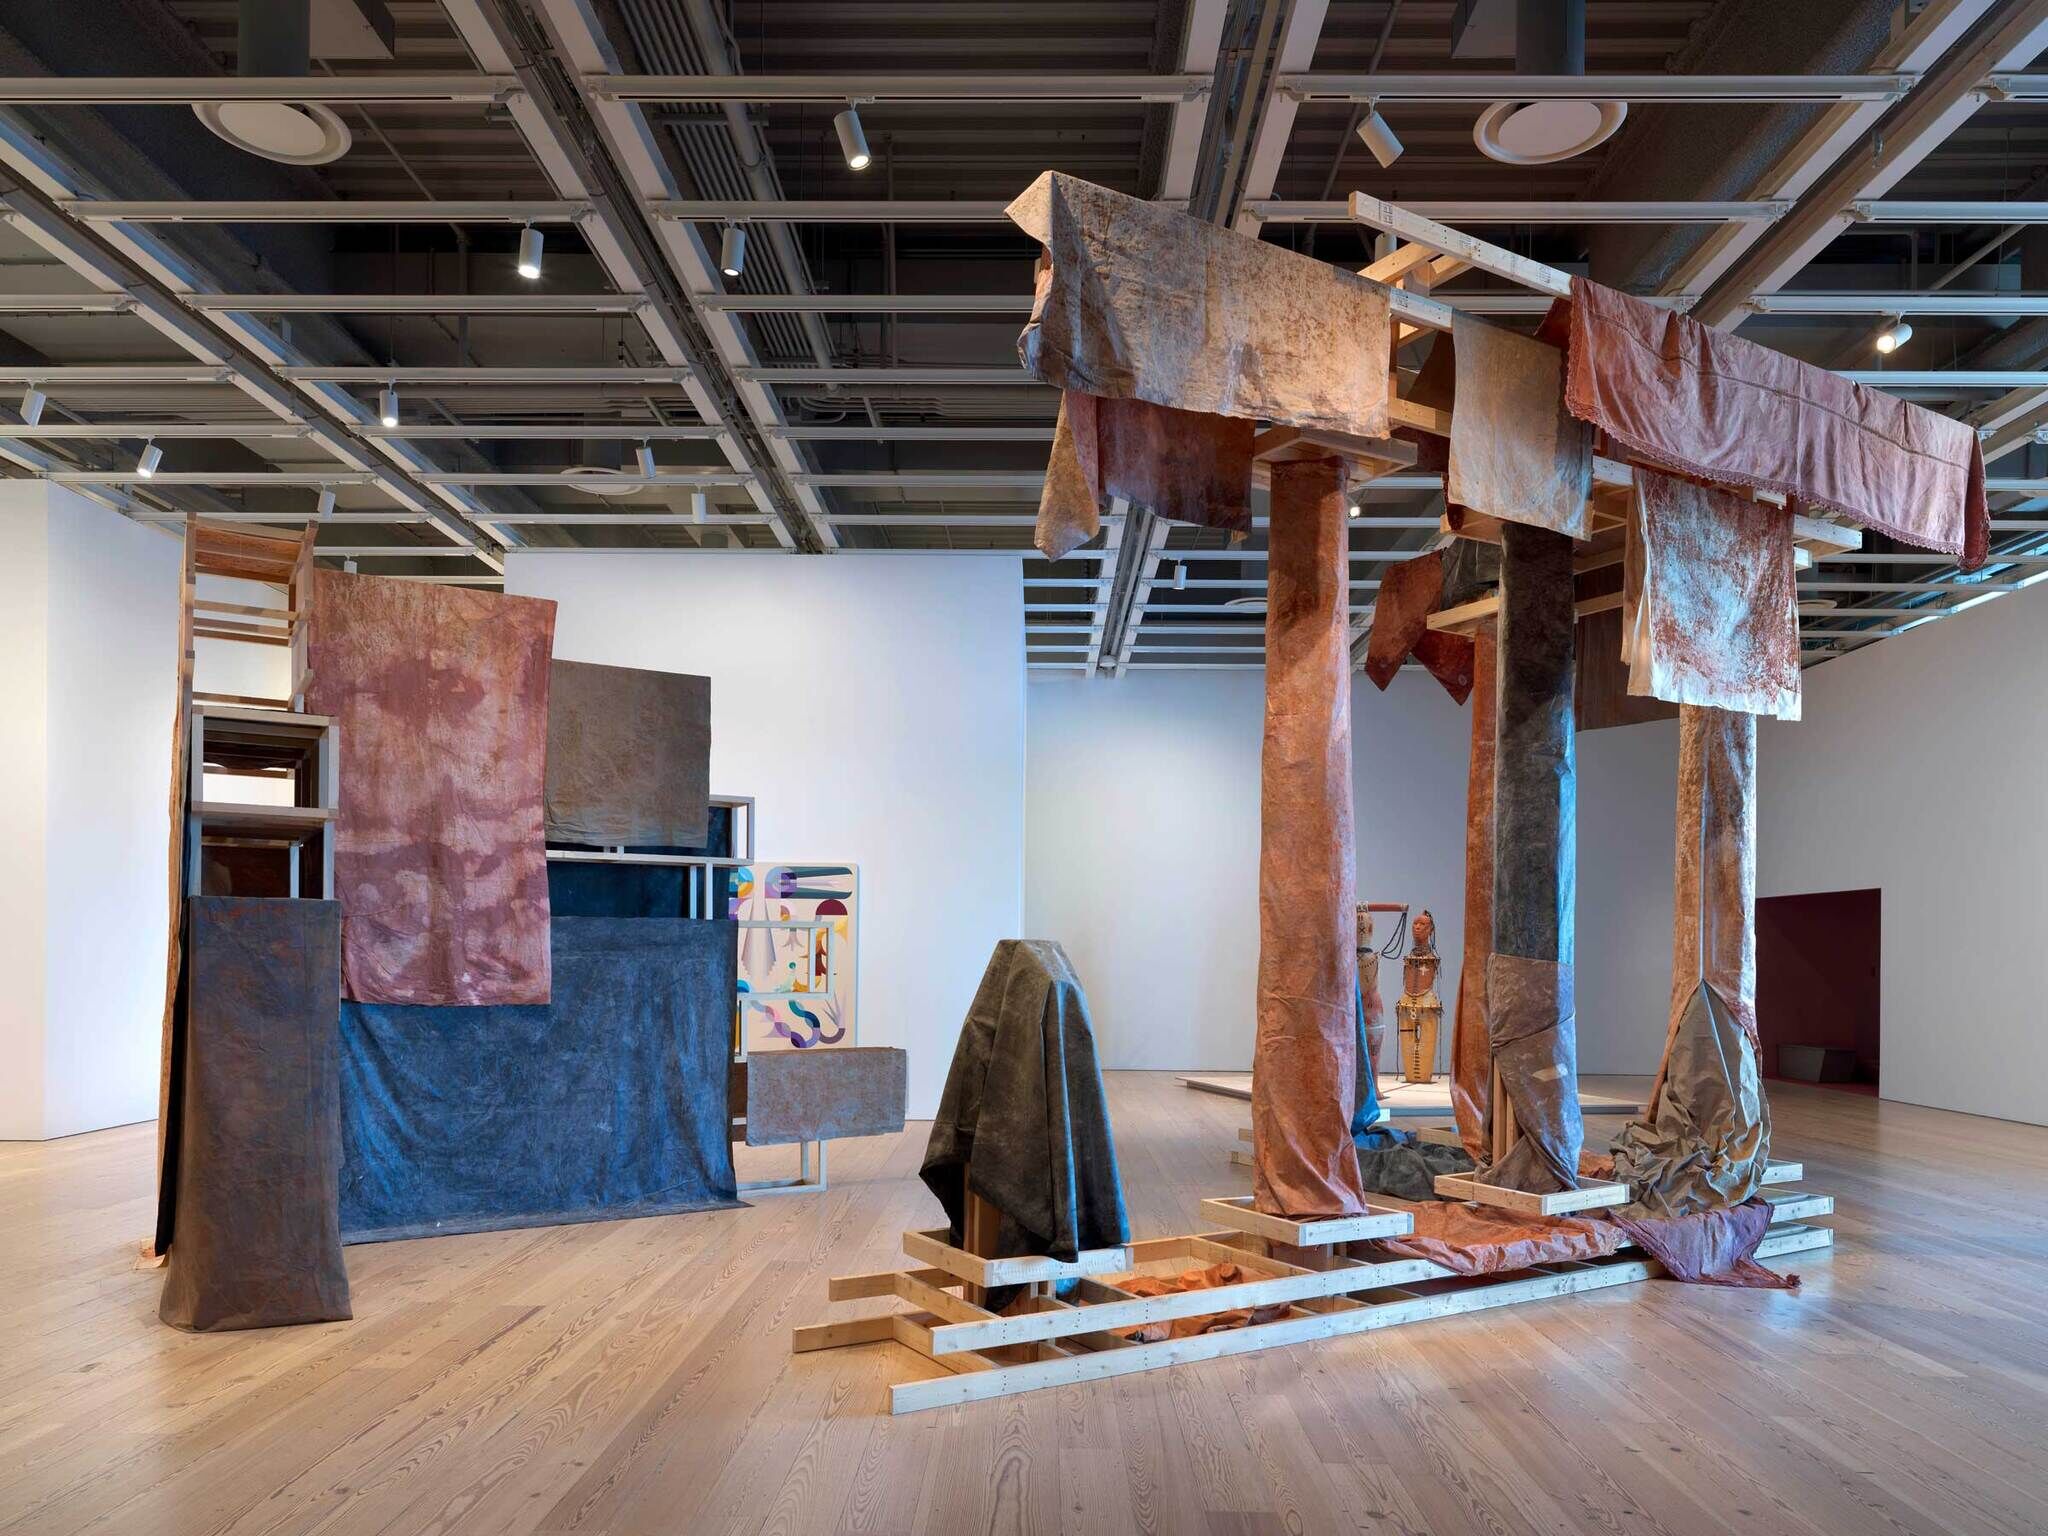 Modern art installation with abstract wooden structures and draped fabrics in a gallery setting.